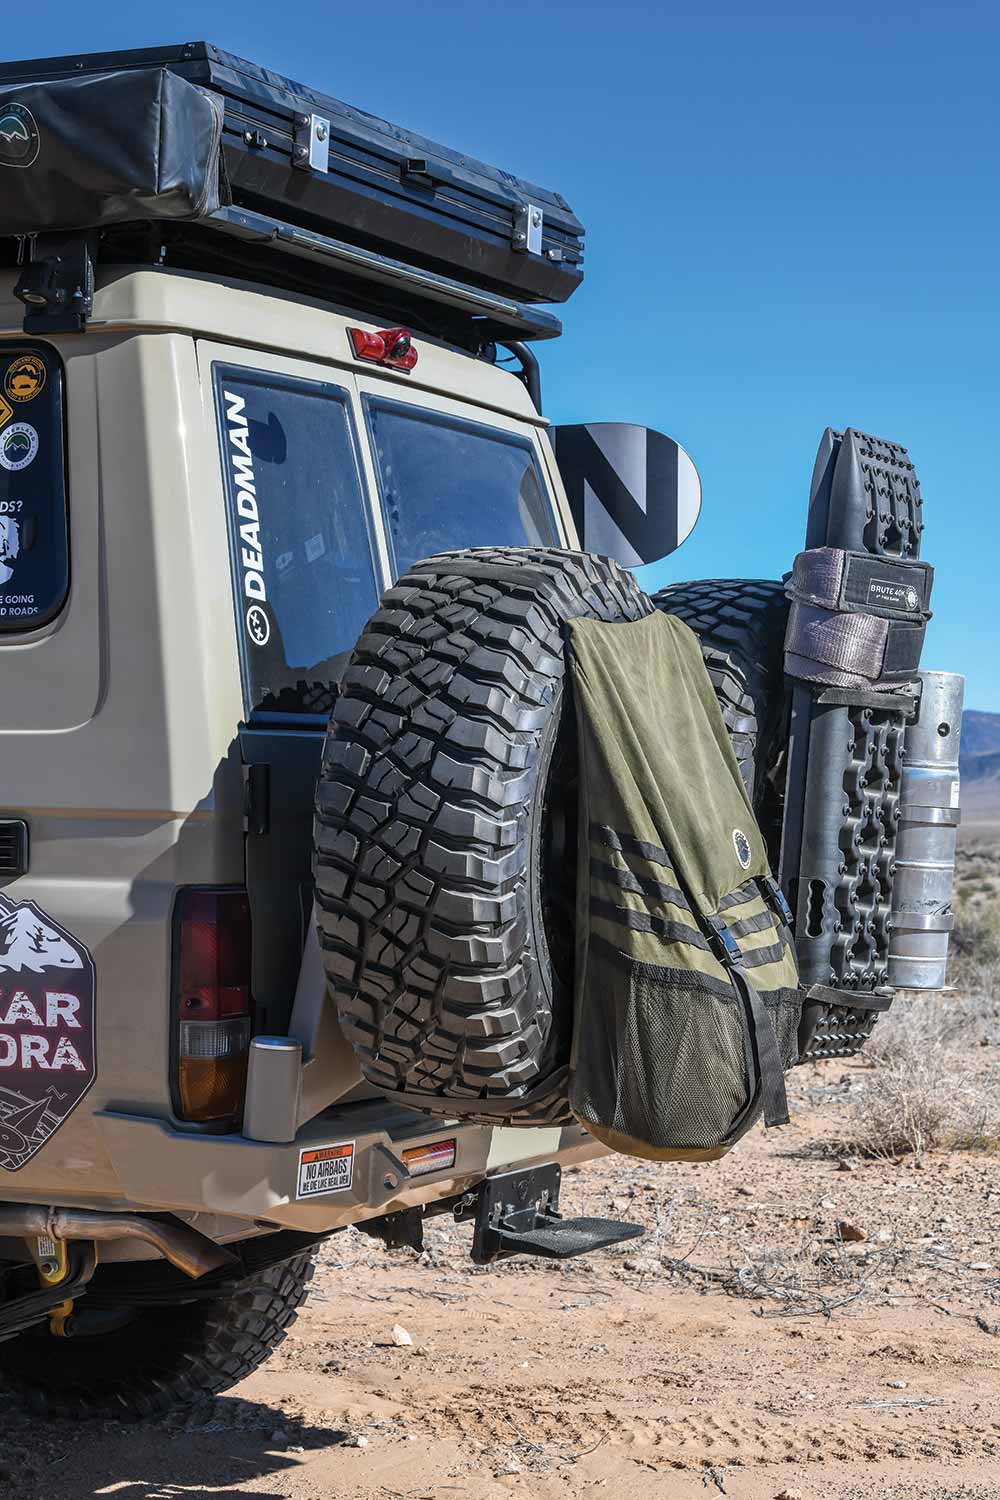 The Cruiser Outfitters rear bumper is set up with a custom second spare tire mount.